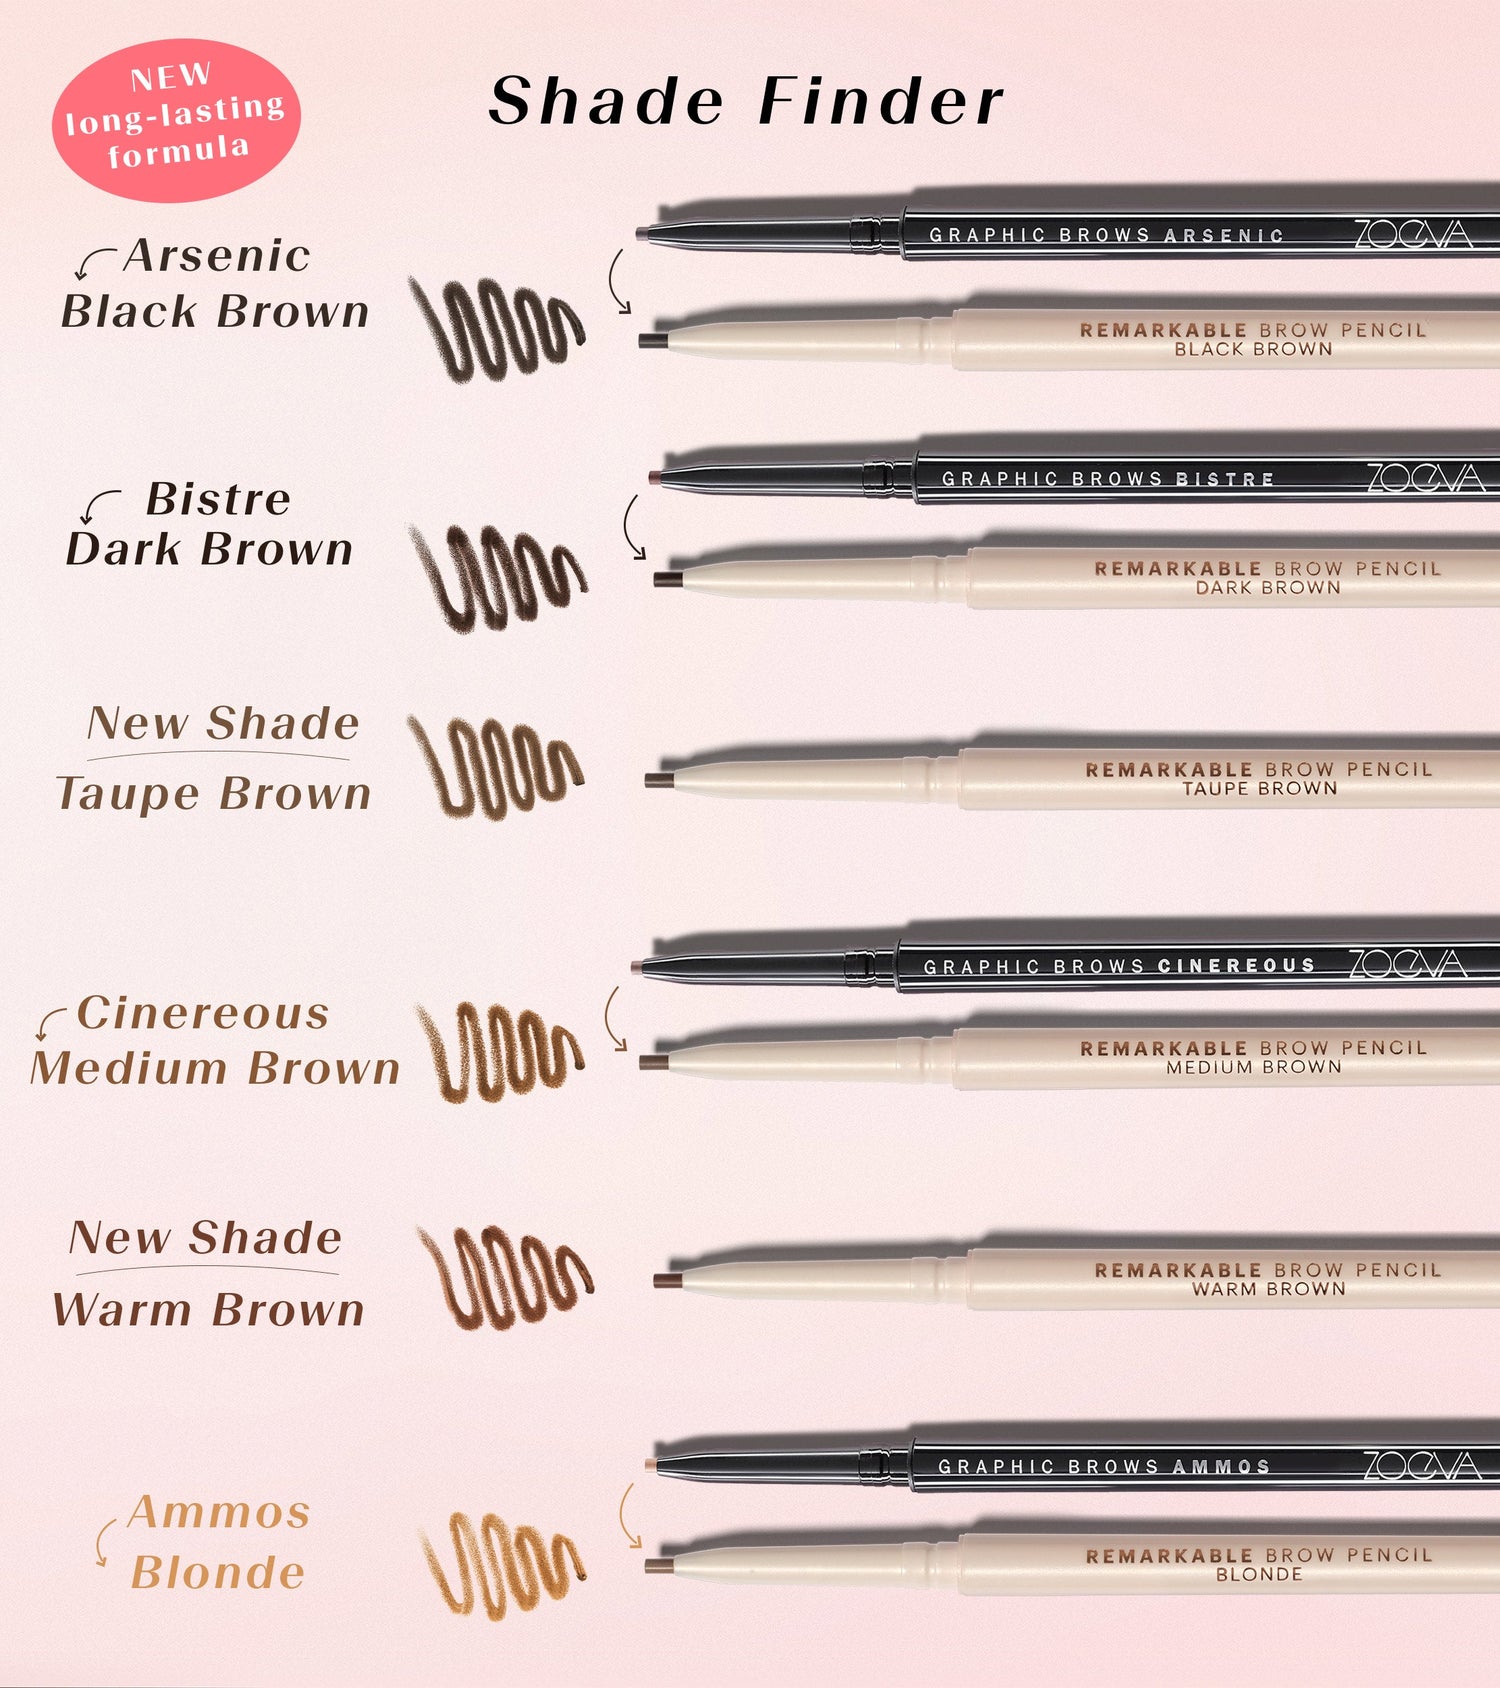 REMARKABLE BROW PENCIL (DARK BROWN) Main Image featured